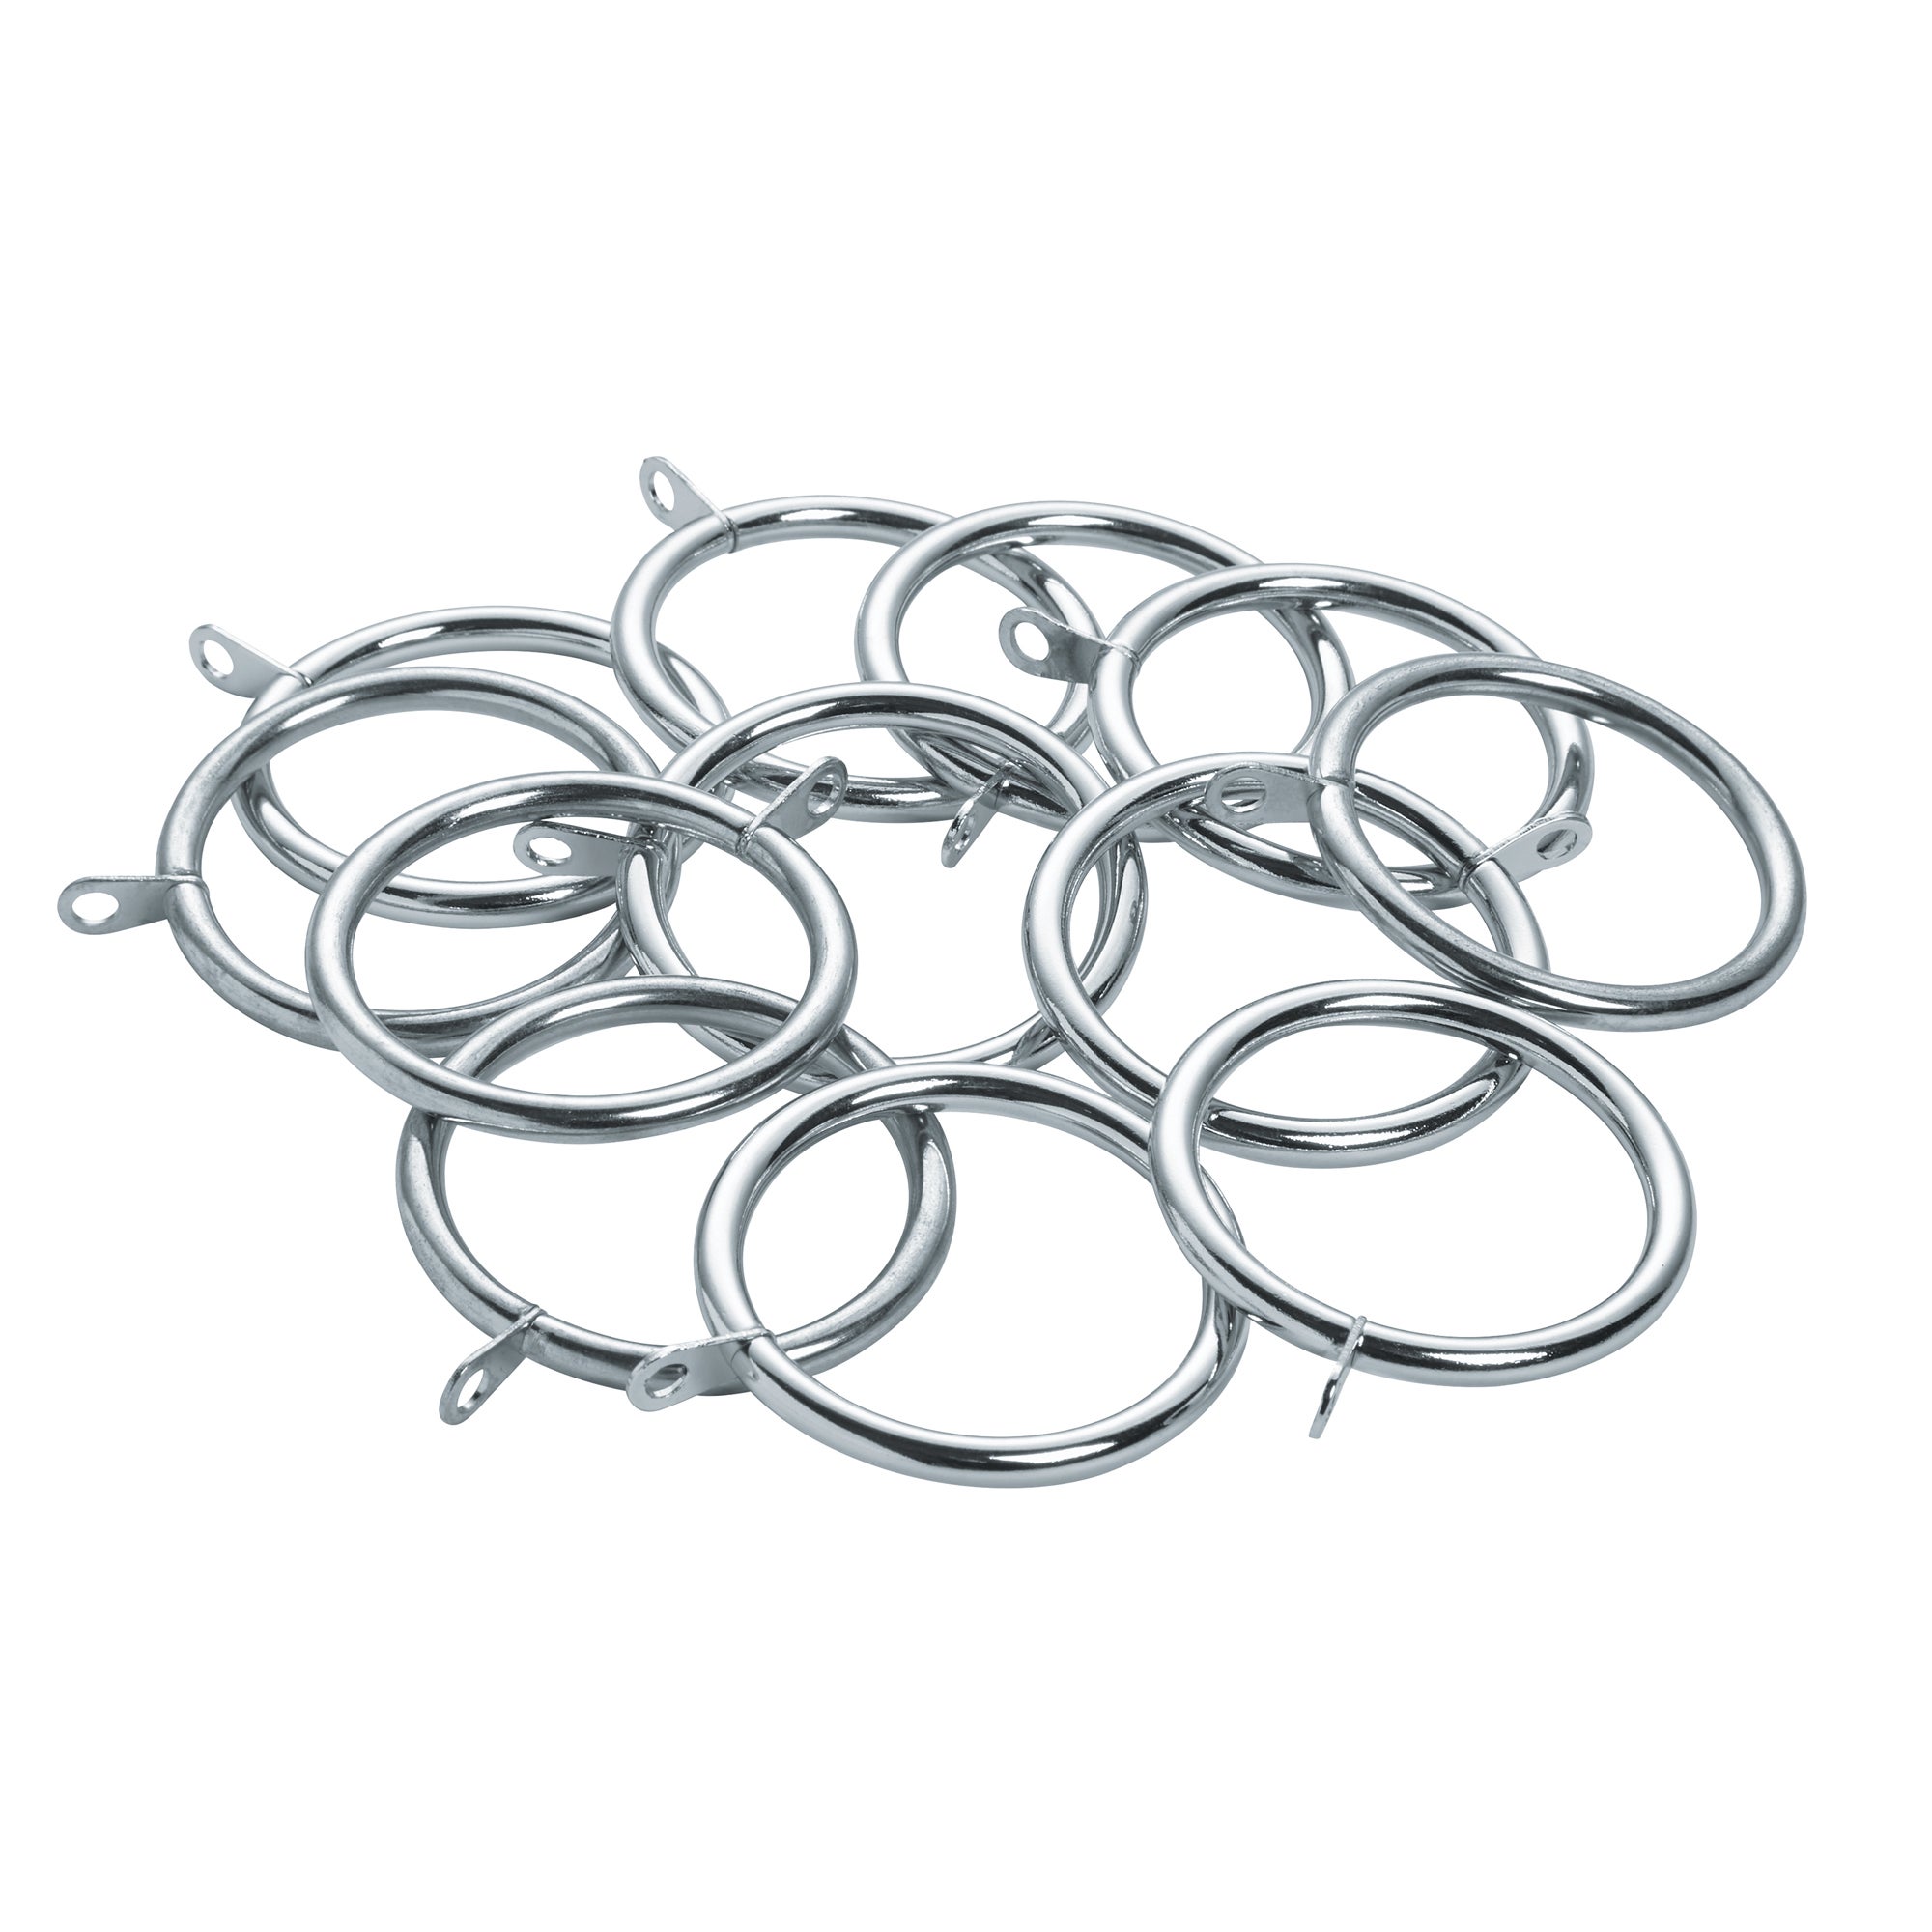 Mix And Match Pack Of 12 Unlined Curtain Rings Dia 28mm Chrome